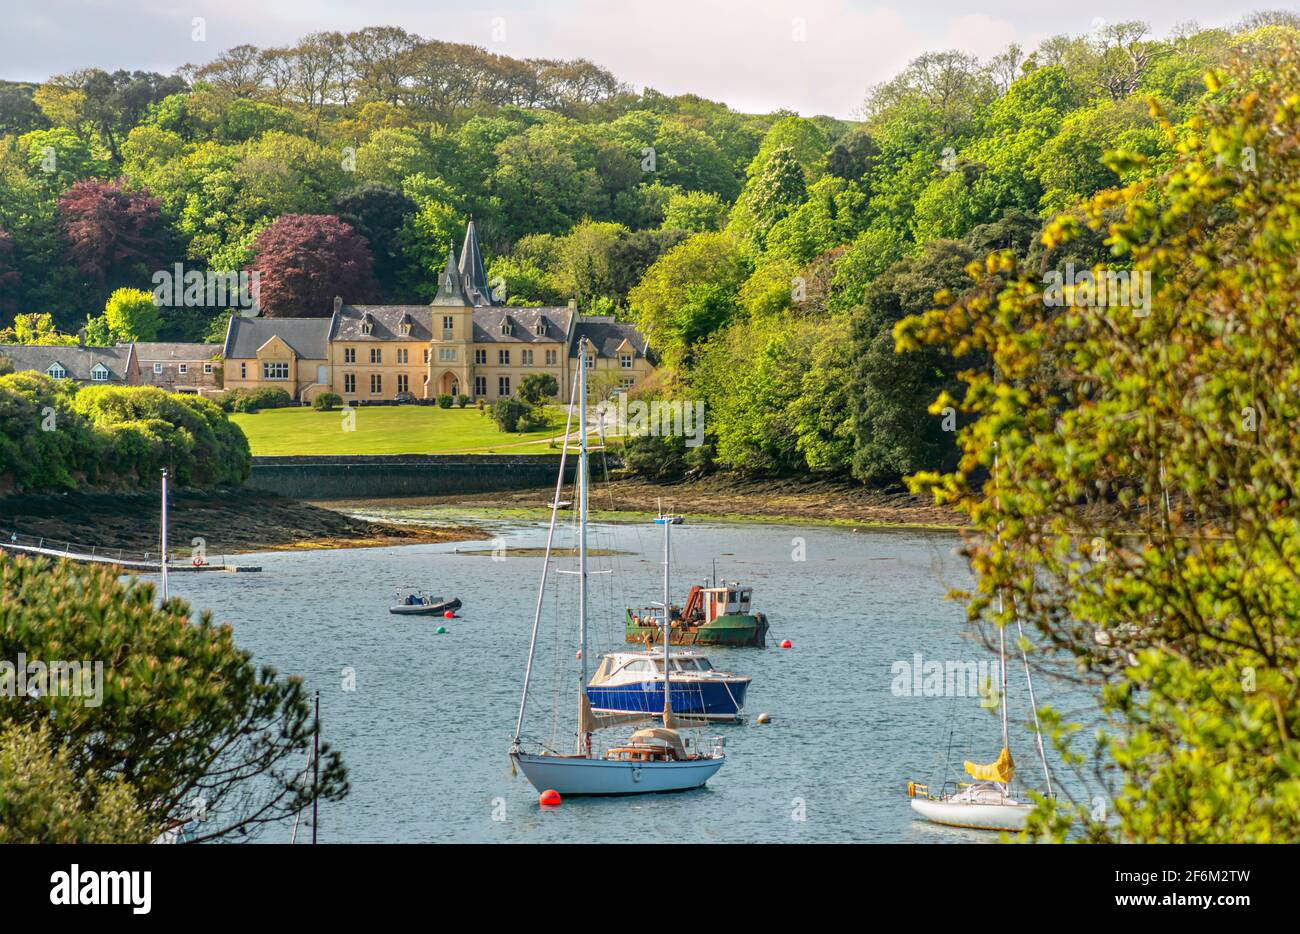 Sailing boats at the coastline near St.Mawes, with the 'Place House' at the background, Cornwall, England, UK Stock Photo